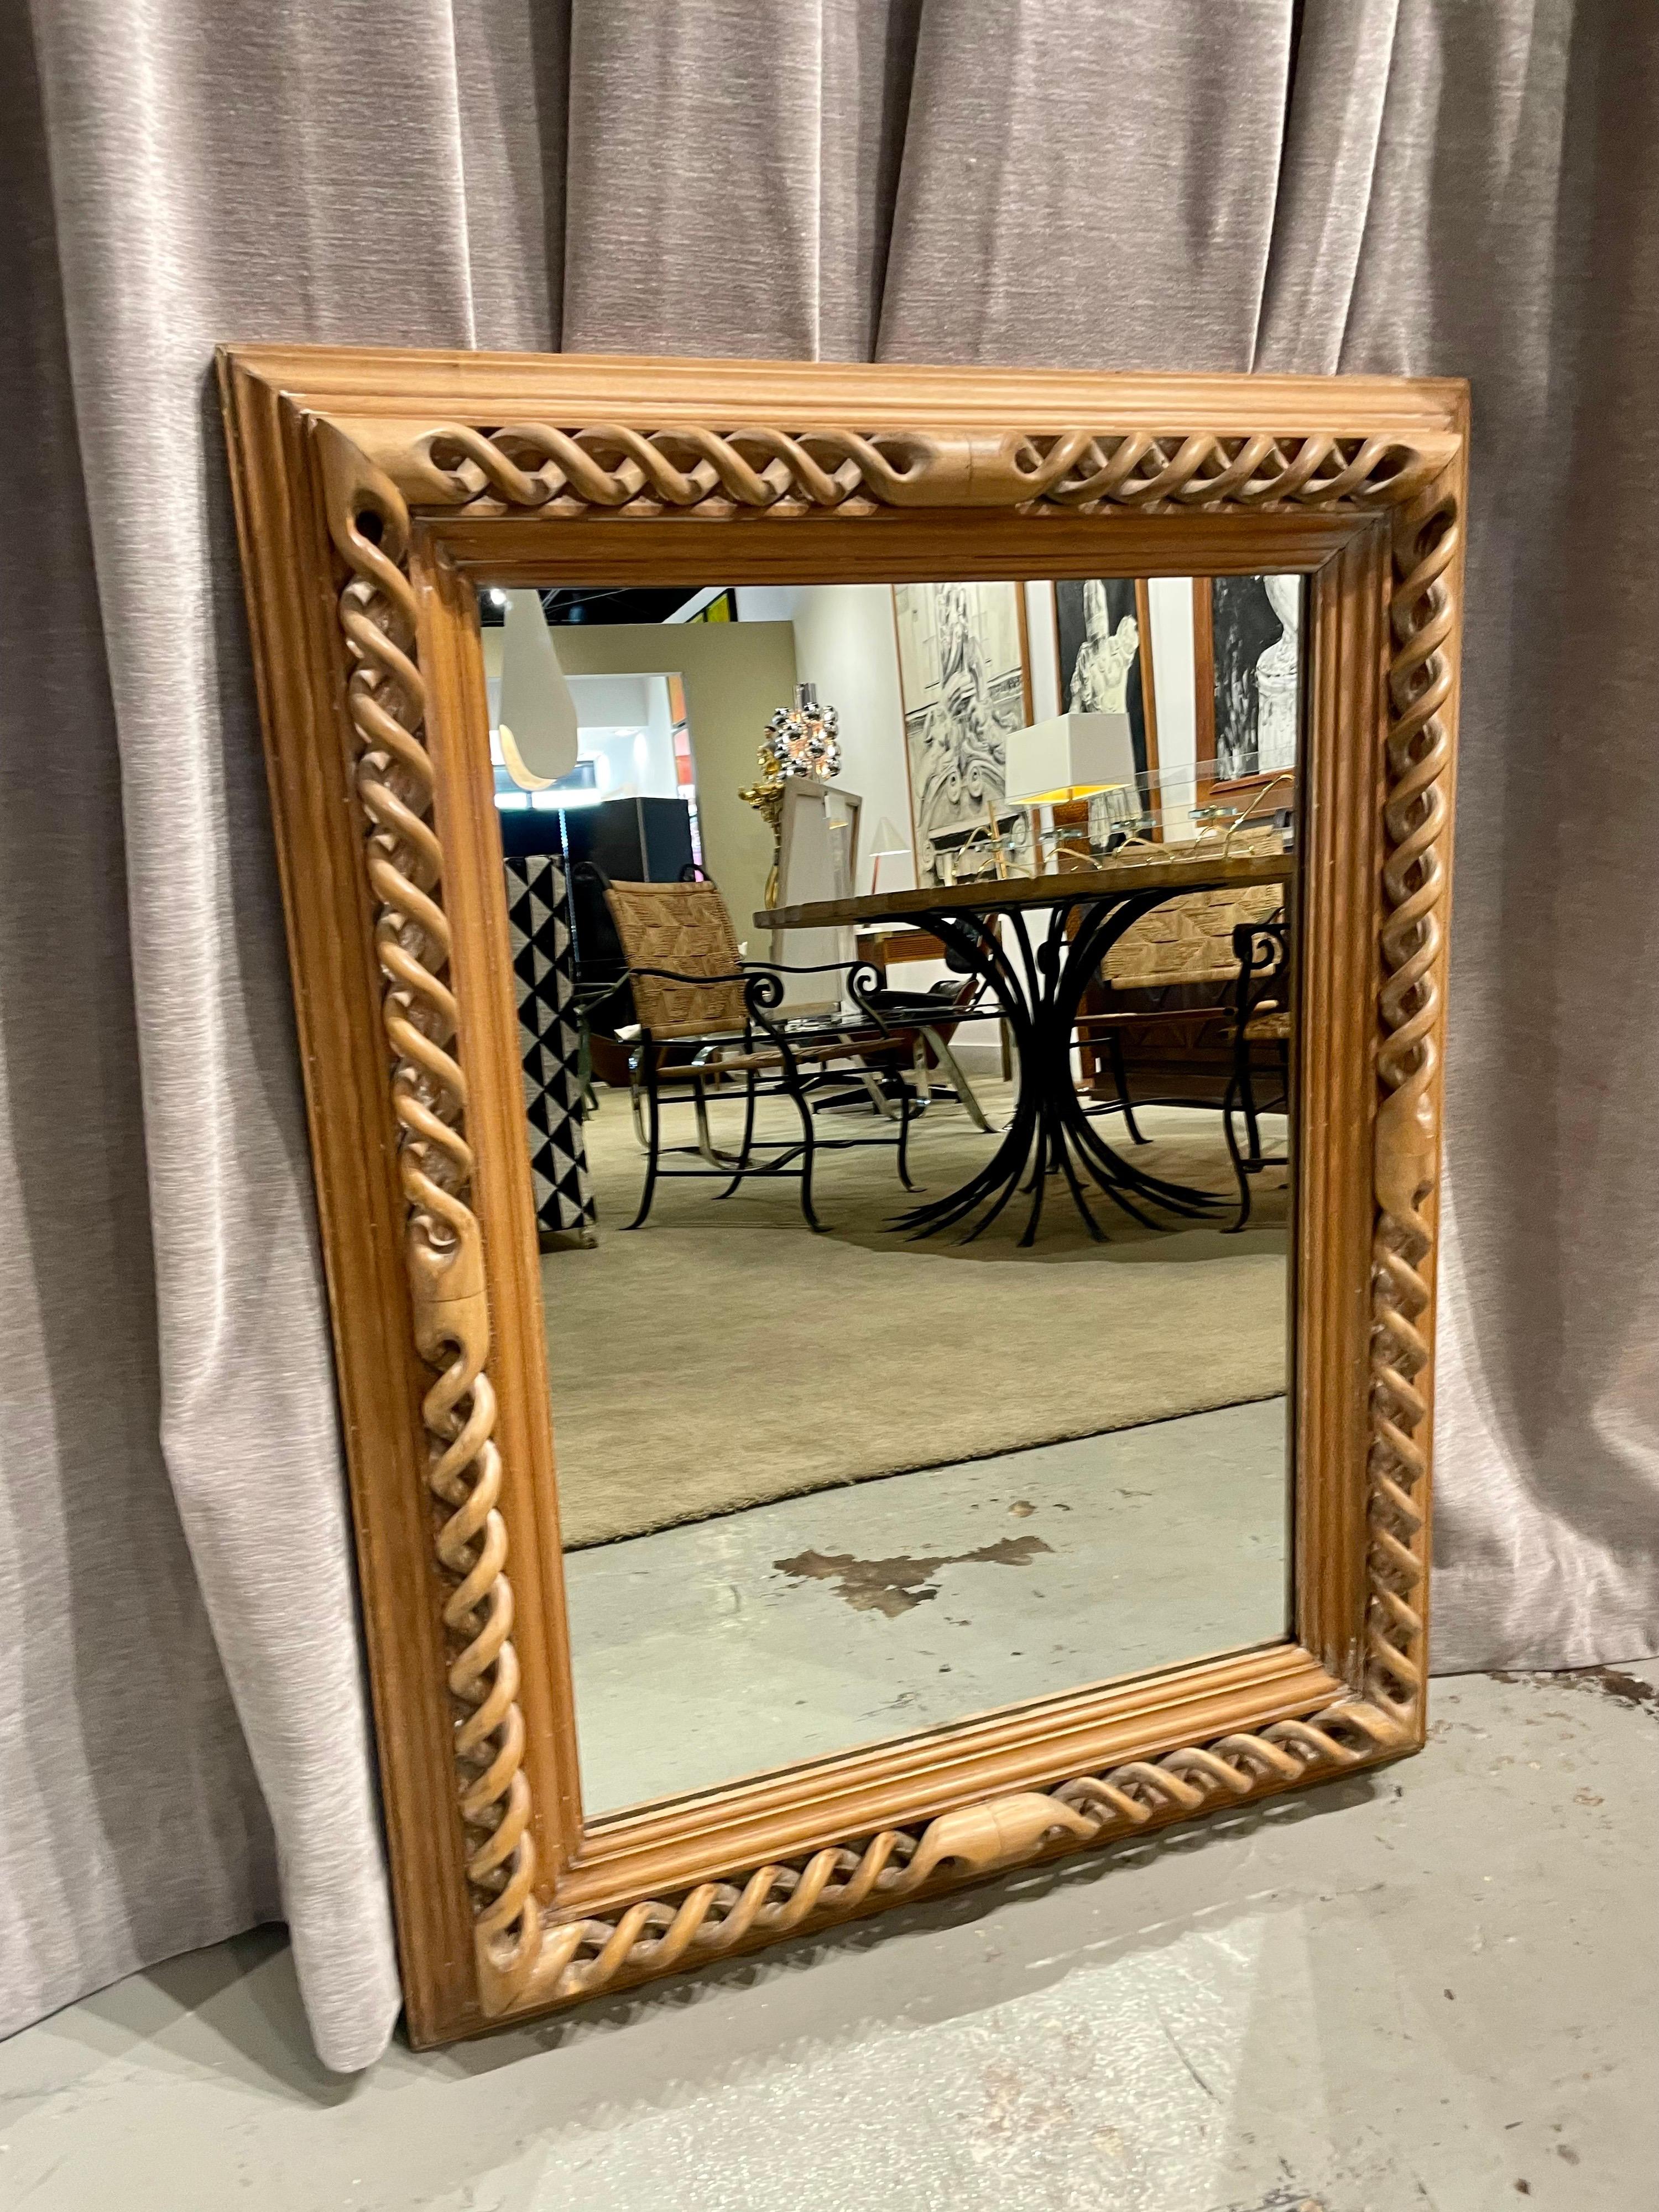 This intricately carved blonde wood mirror frame shows great detail and artistry.